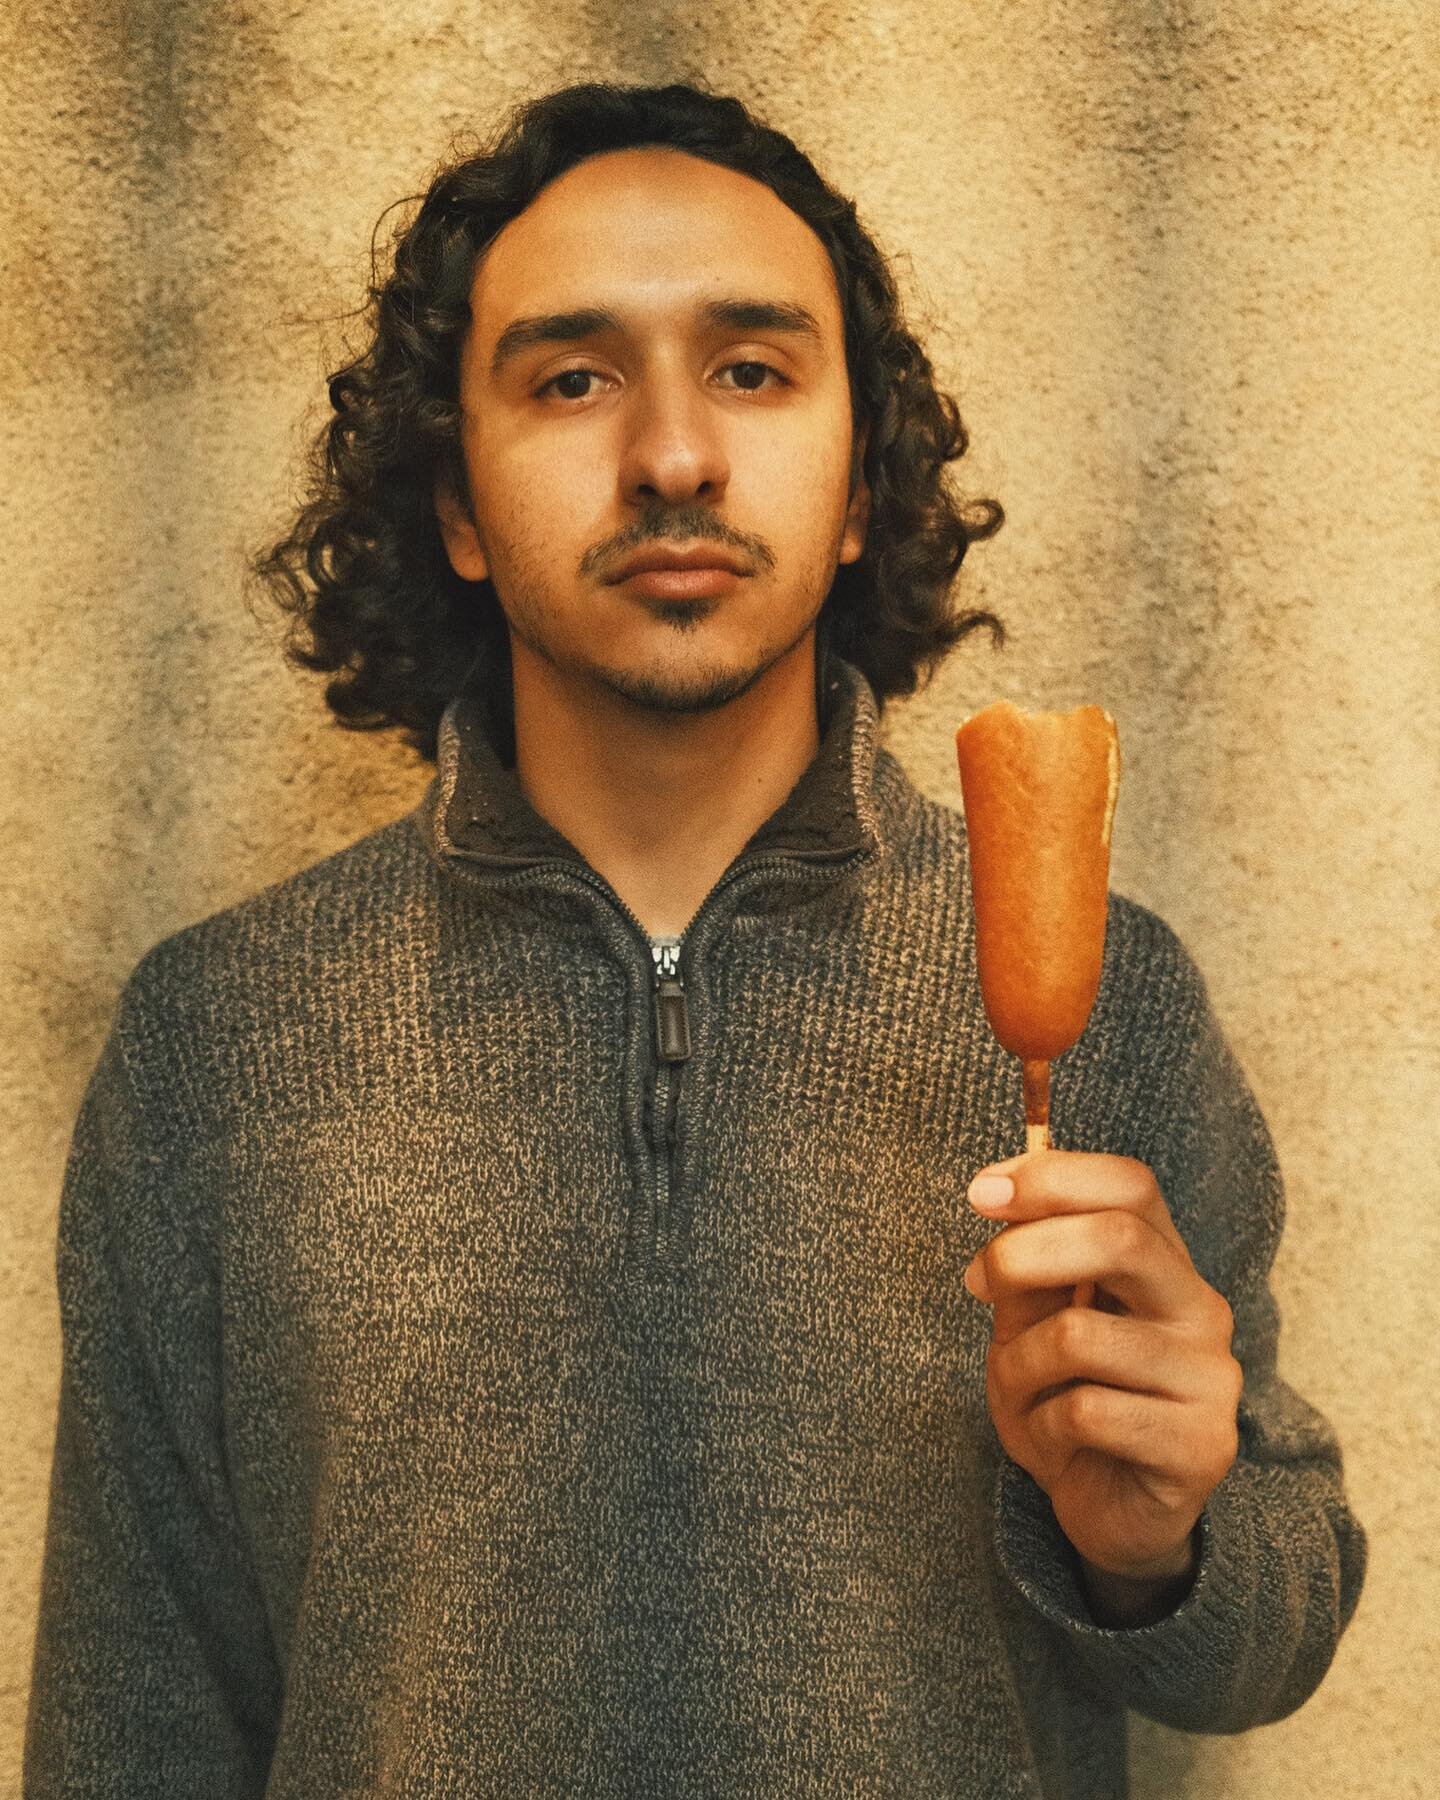 the touching story of a man and his corn dog